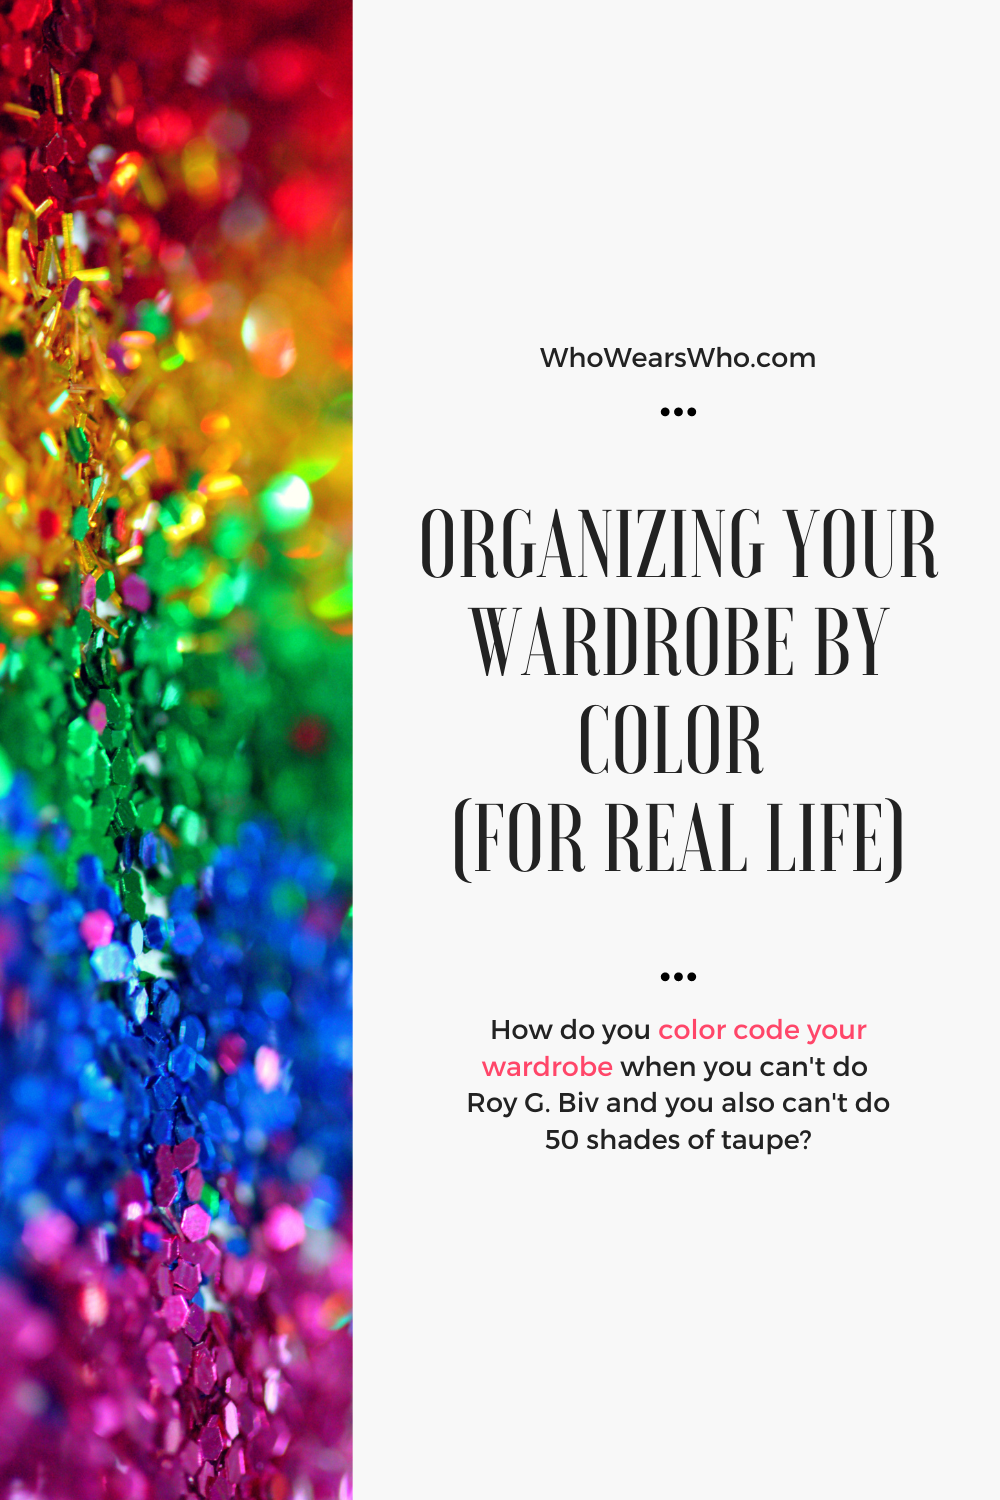 Organizing Your Wardrobe by Color (for real life)